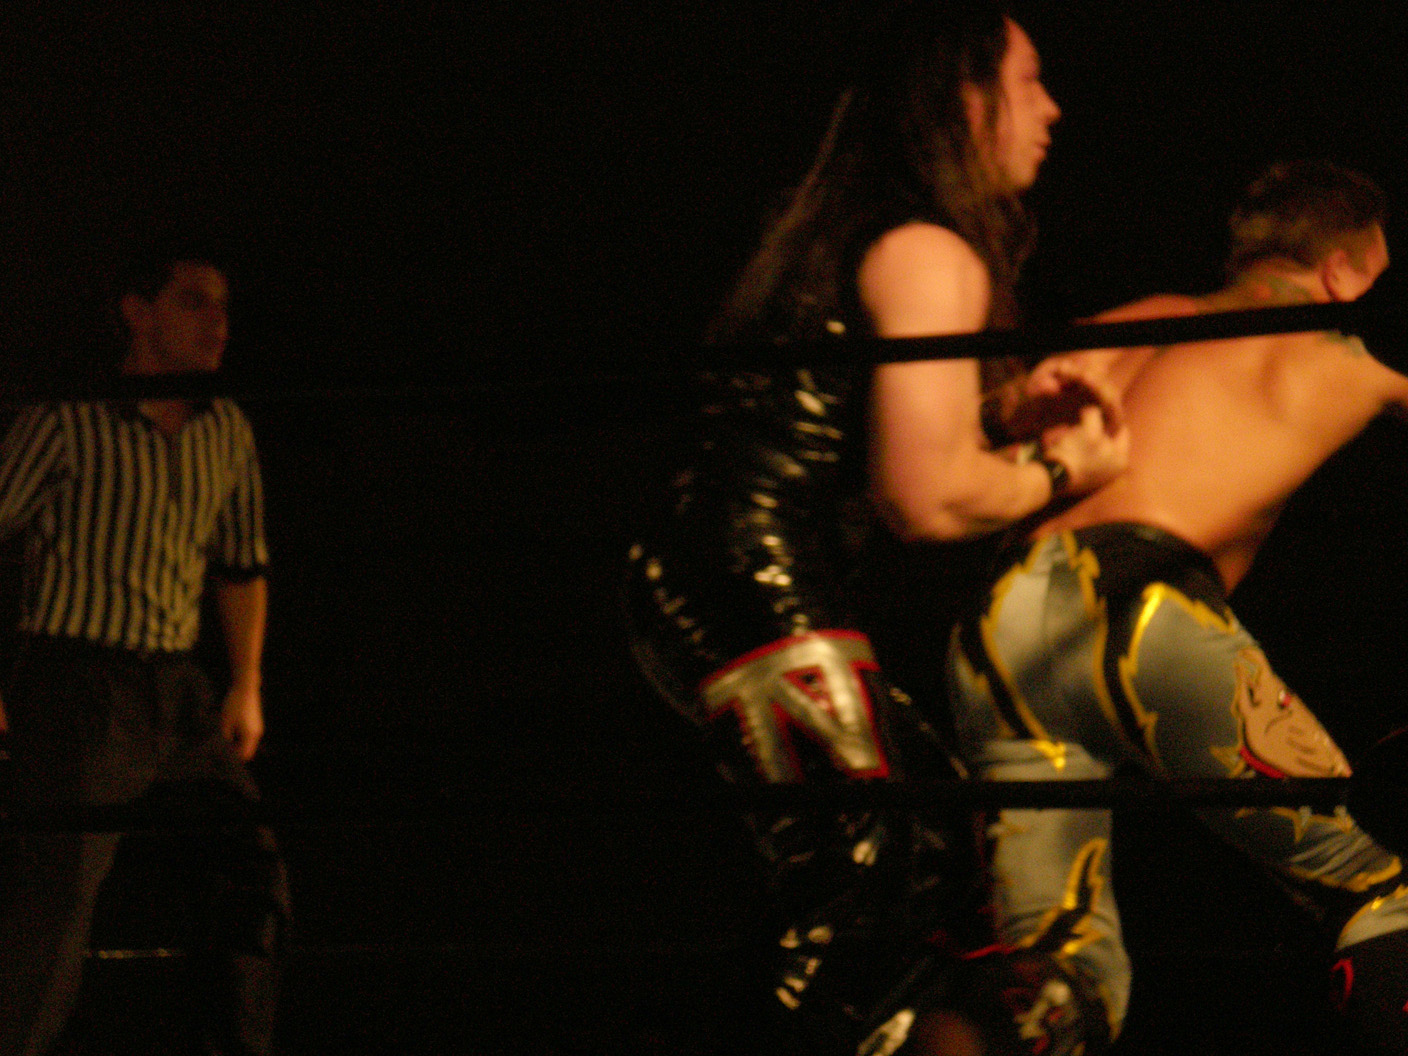 two women fighting each other in a ring